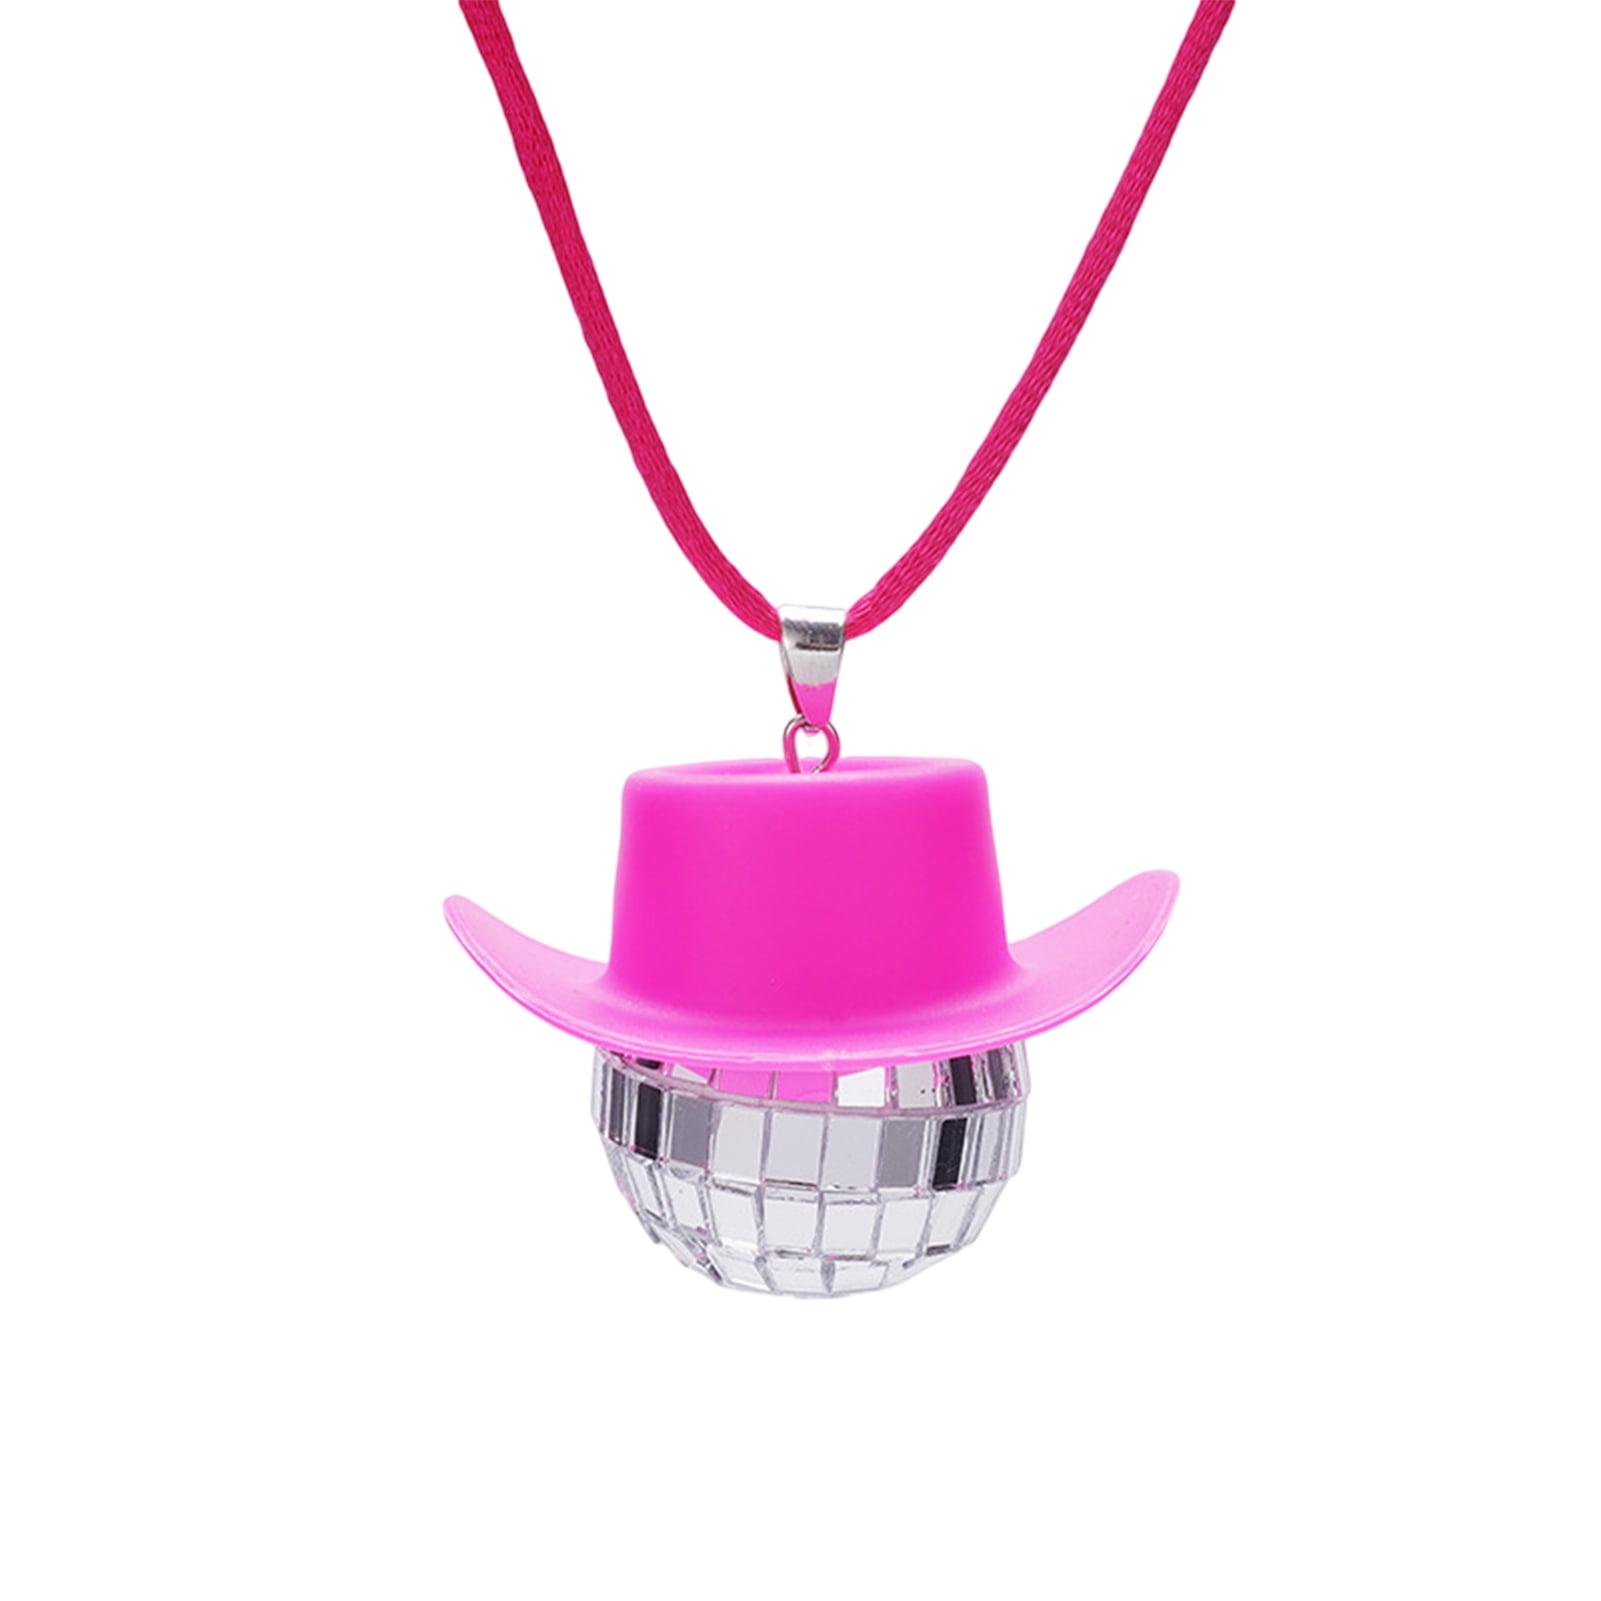 Frogued Car Hanging Cowboy Hat Ball Shiny Mirror Effect Reflective